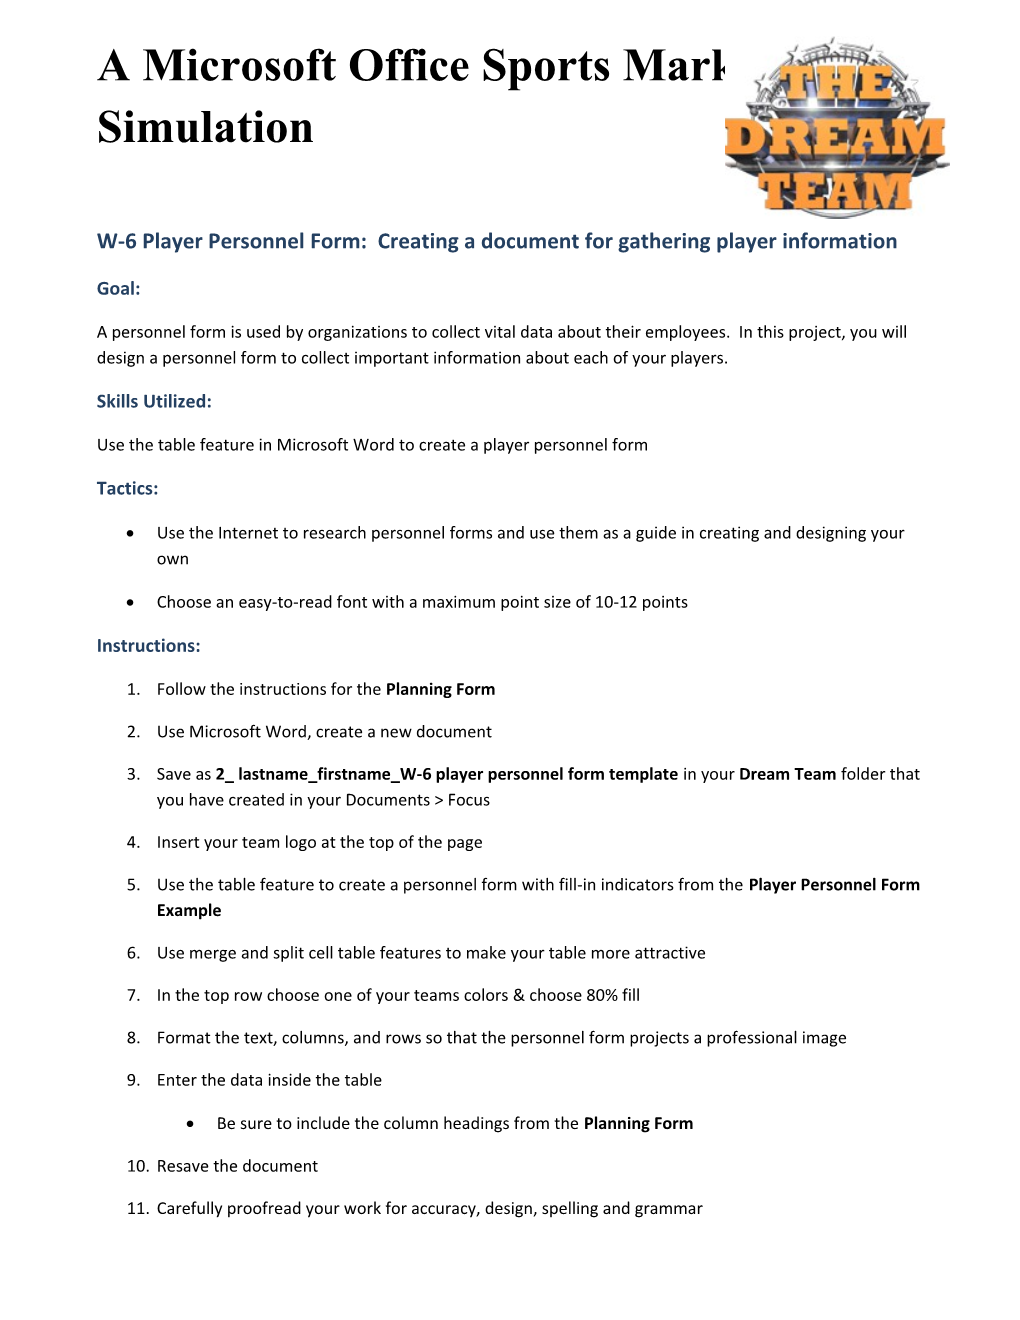 W-6 Player Personnel Form: Creating a Document for Gathering Player Information